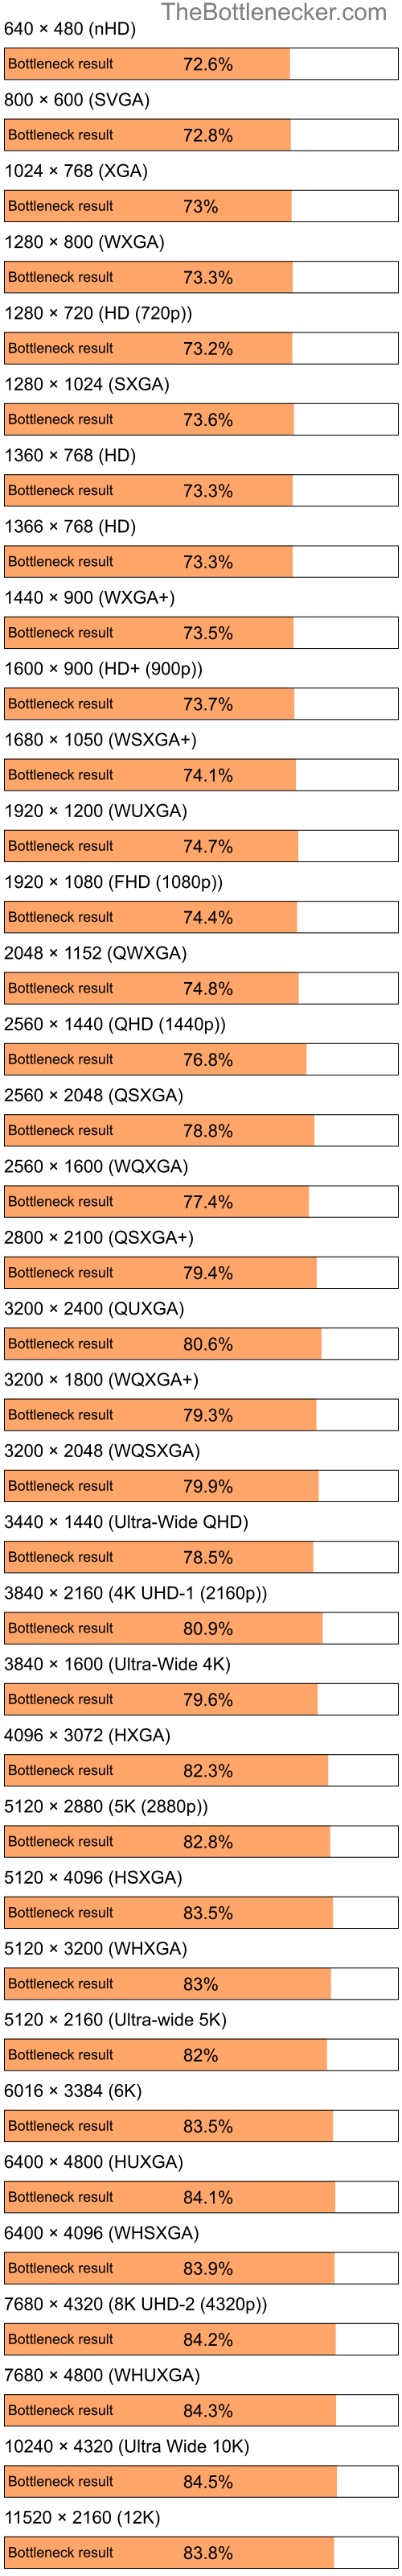 Bottleneck results by resolution for Intel Celeron M and NVIDIA GeForce 7300 GS in Graphic Card Intense Tasks